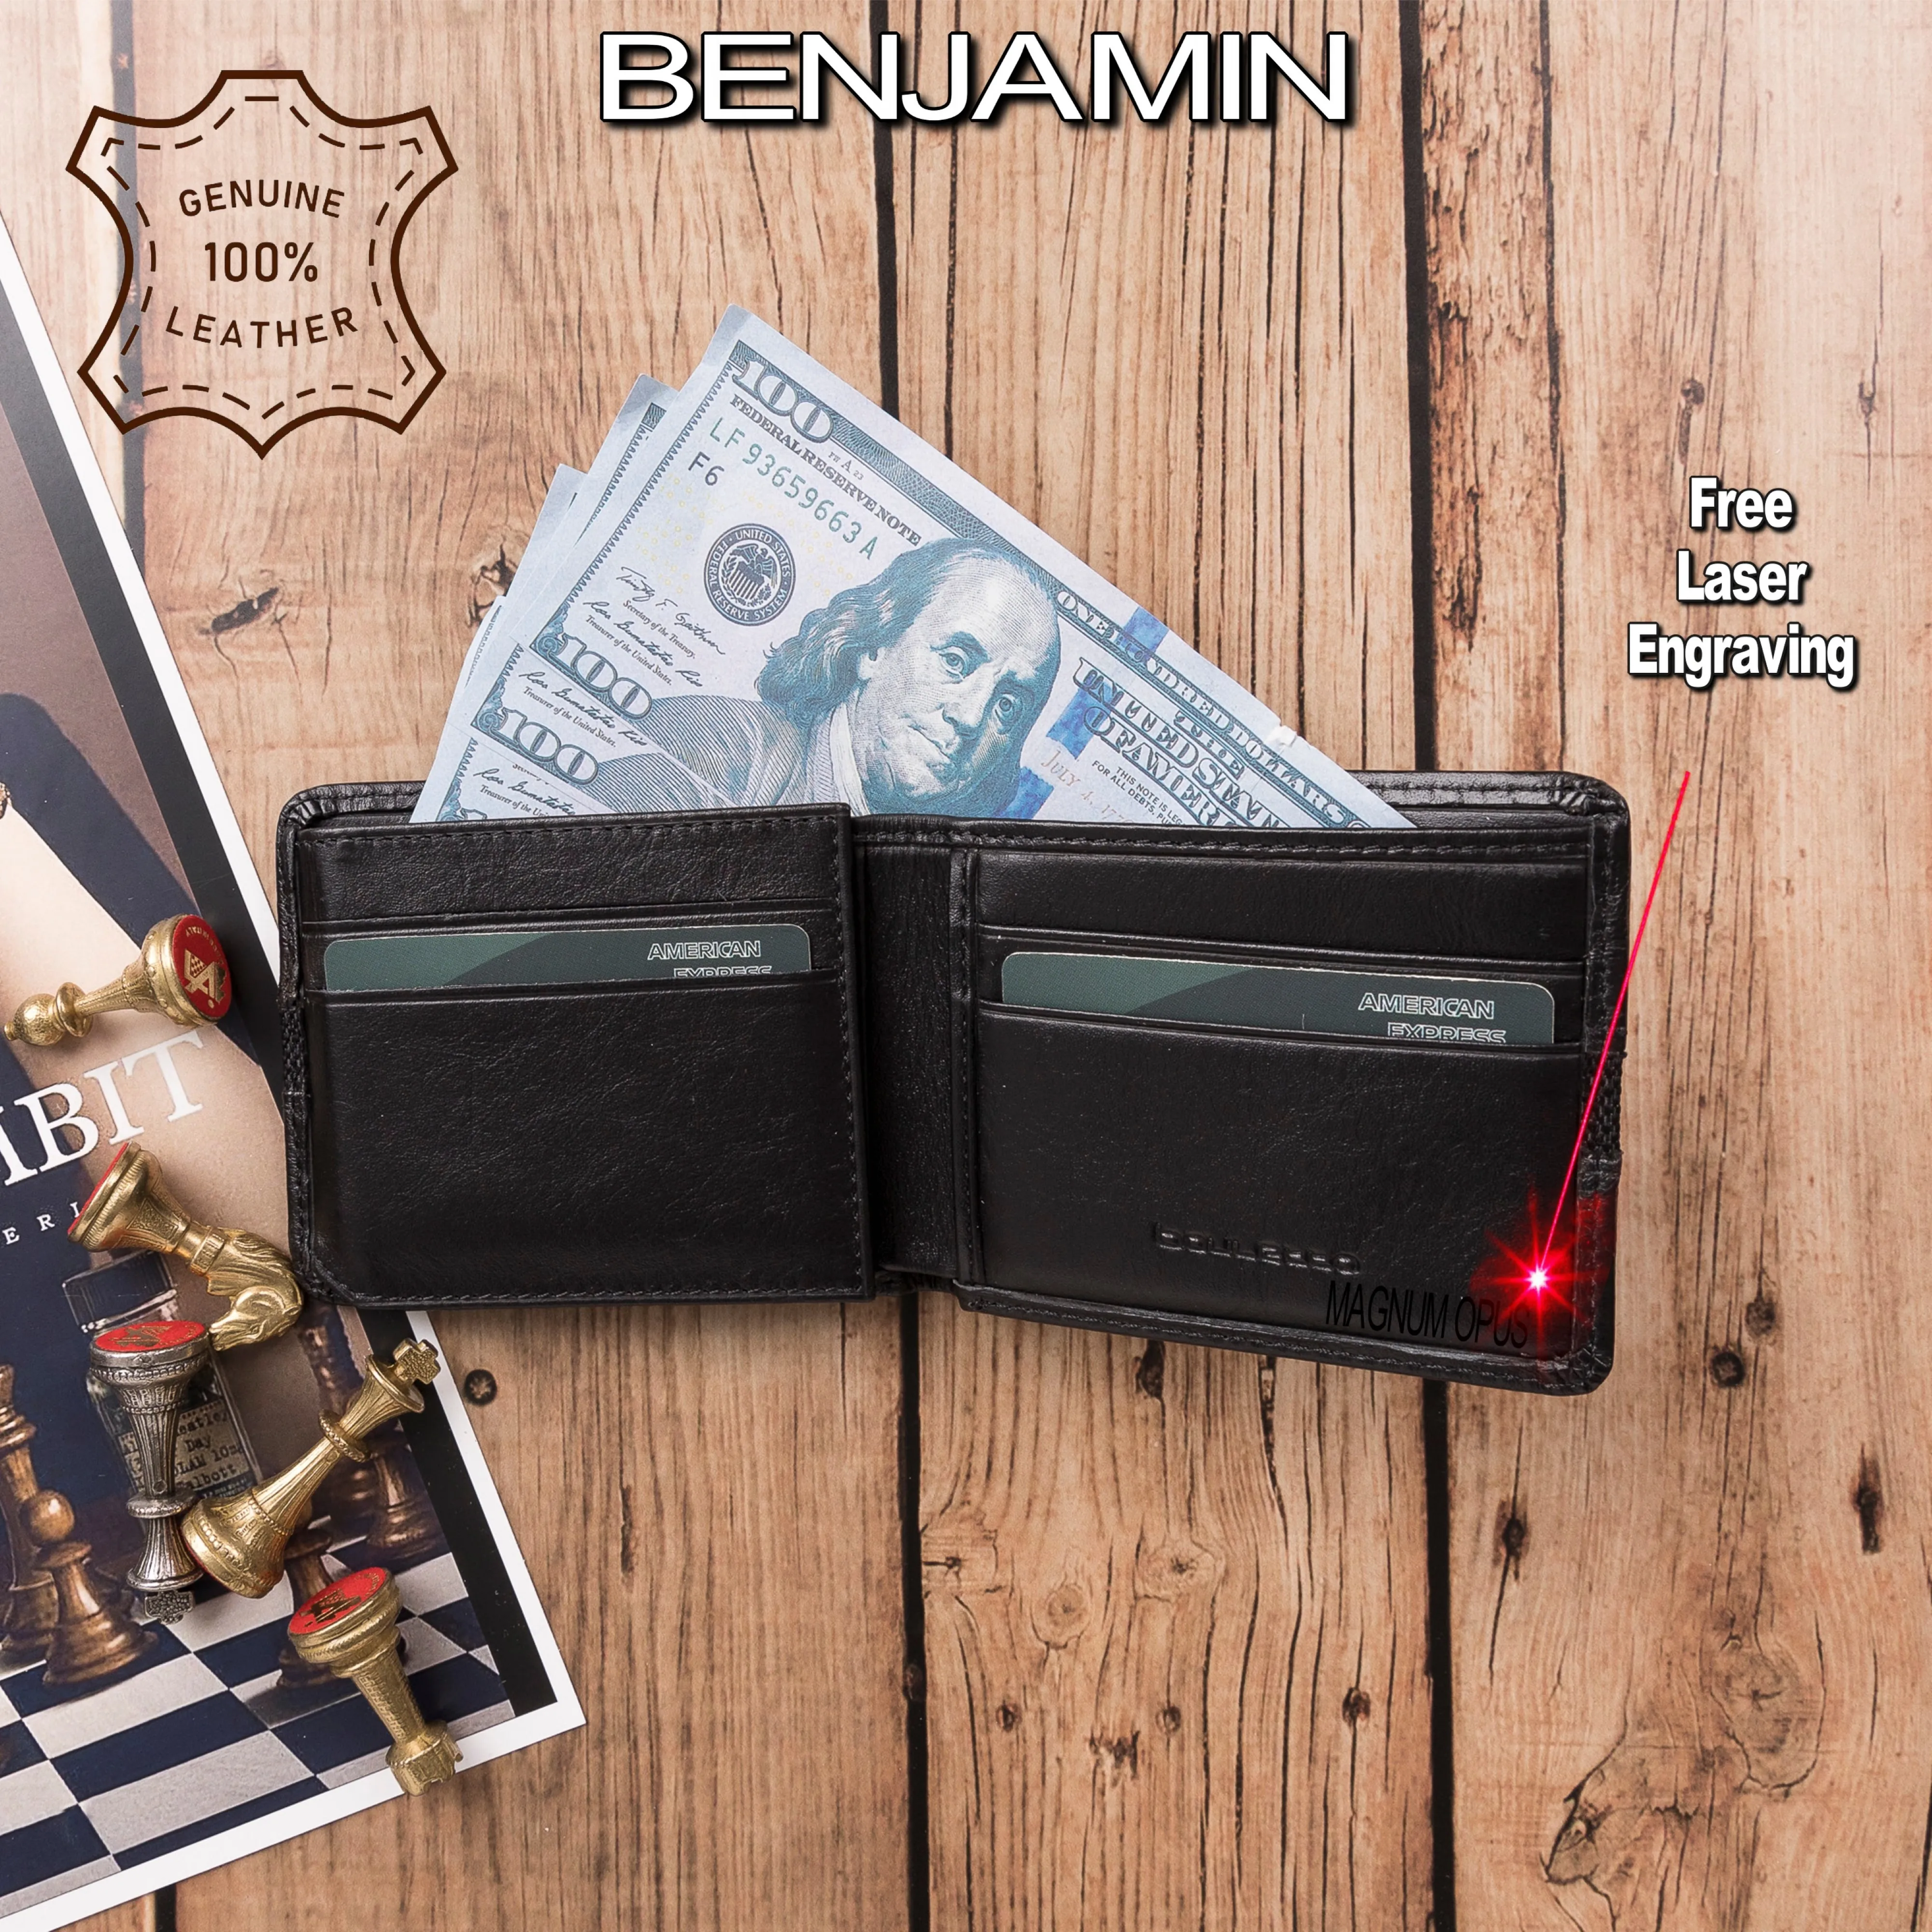 Handmade Genuine Leather Credit Card, Cash and ID Card Holder Wallet Stores Up To 7 Cards for Jacket Inner Pocket Elegant Style